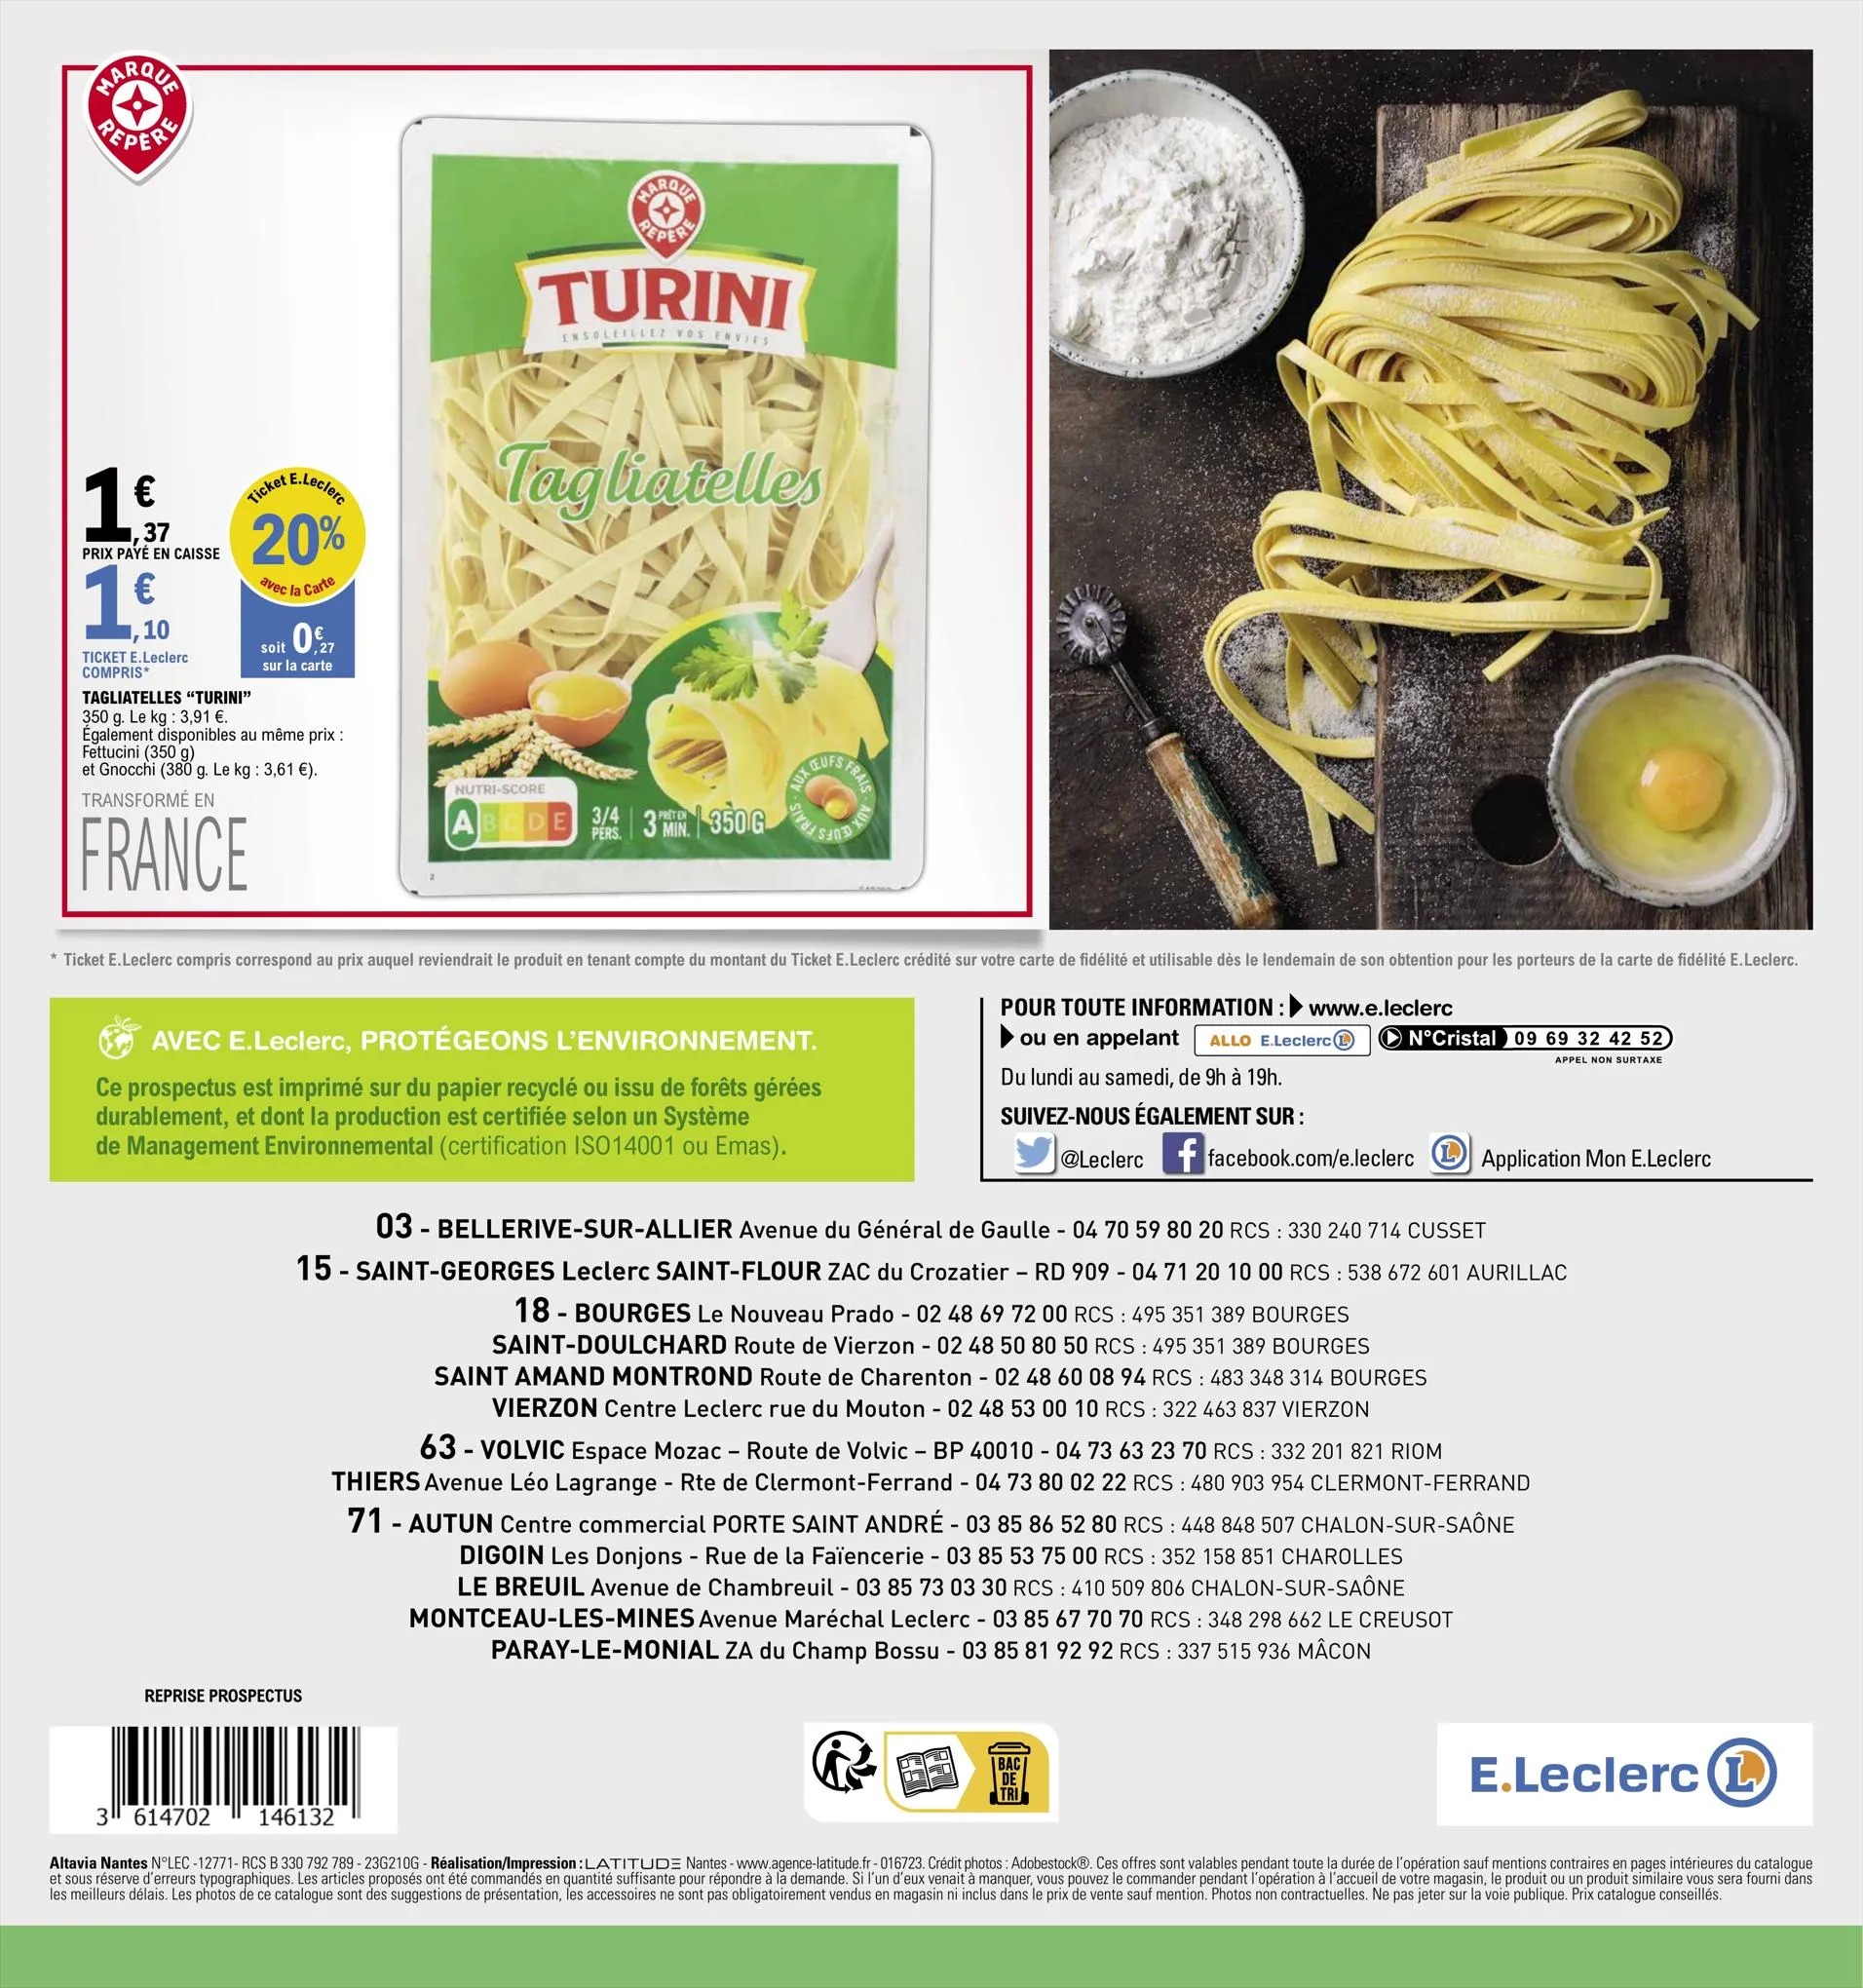 Catalogue Relance Alimentaire 10 - Mixte, page 00016